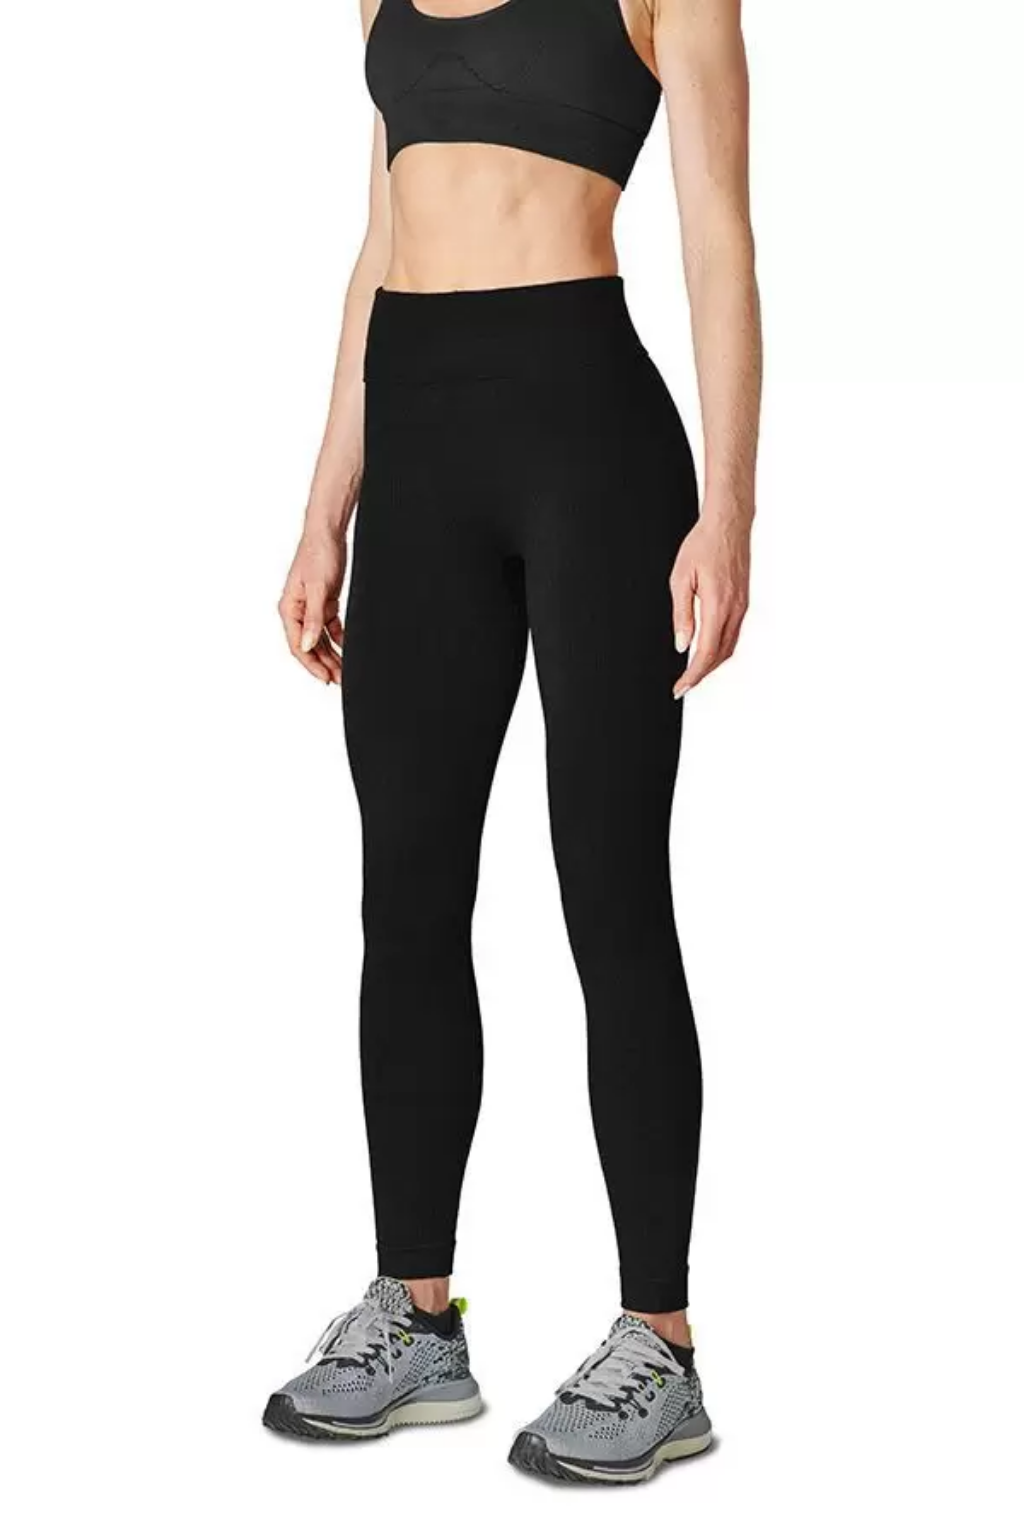 Antilope Workout Leggings for Women High Waist, Yoga Pants with